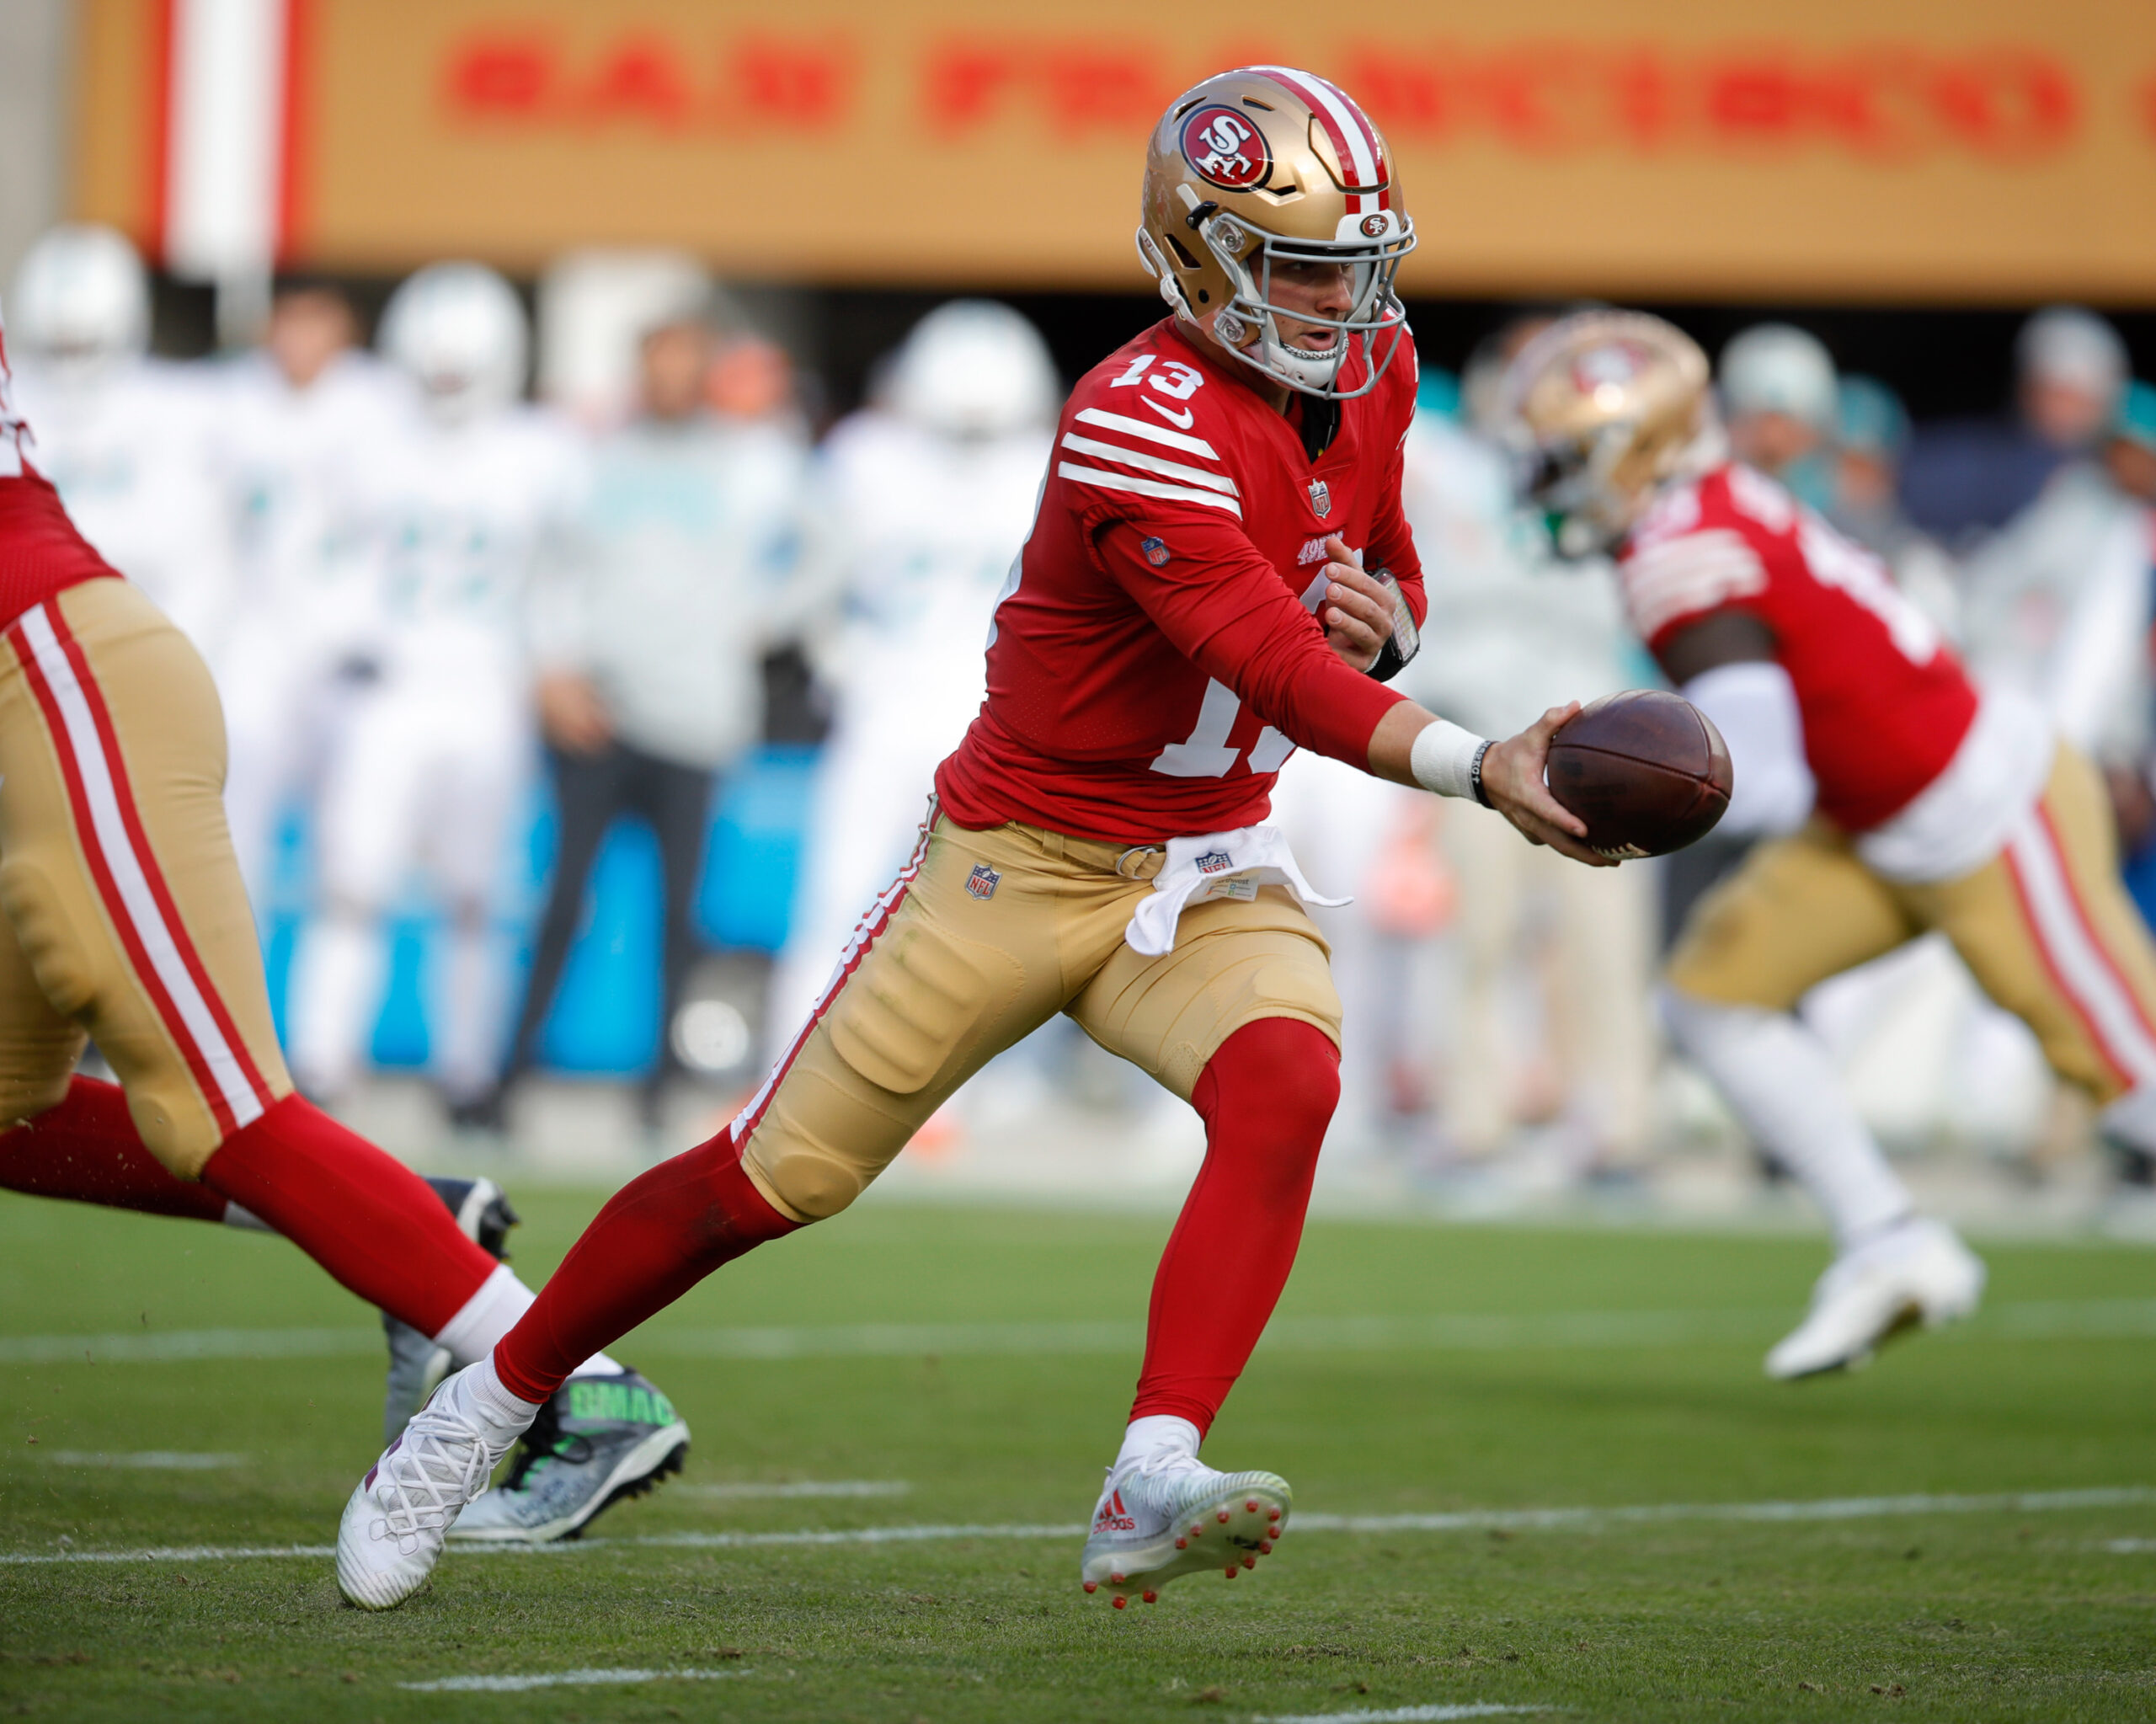 Brock Purdy's dad, Dan Marino and the story behind why 49ers' QB